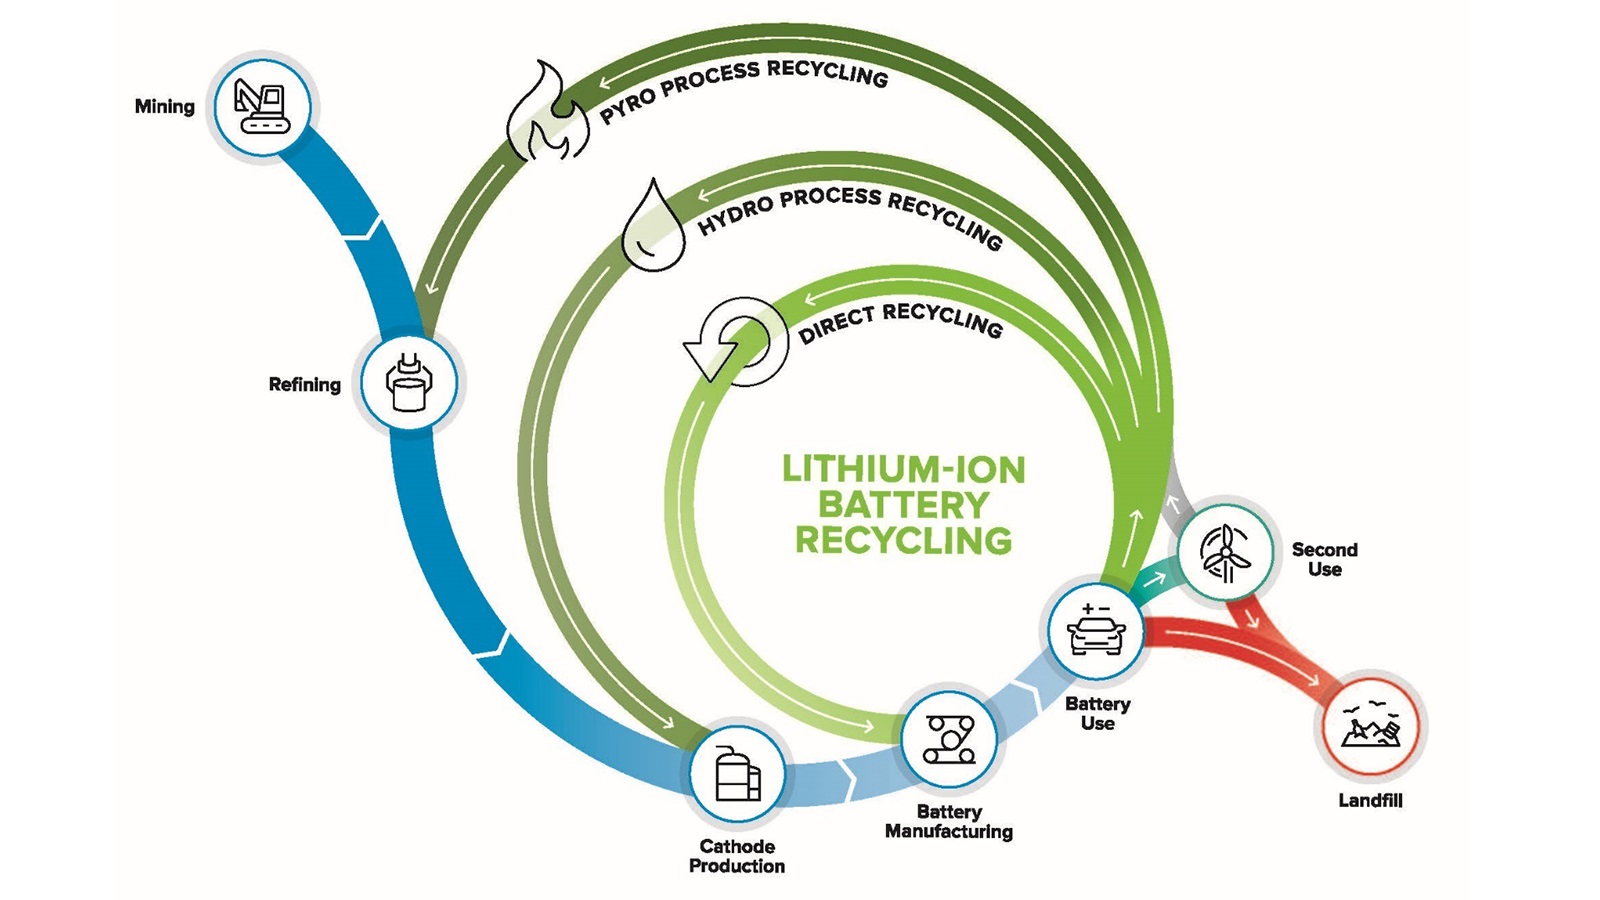 Battery collaboration meeting discusses new pathways to recycle lithium-ion batteries